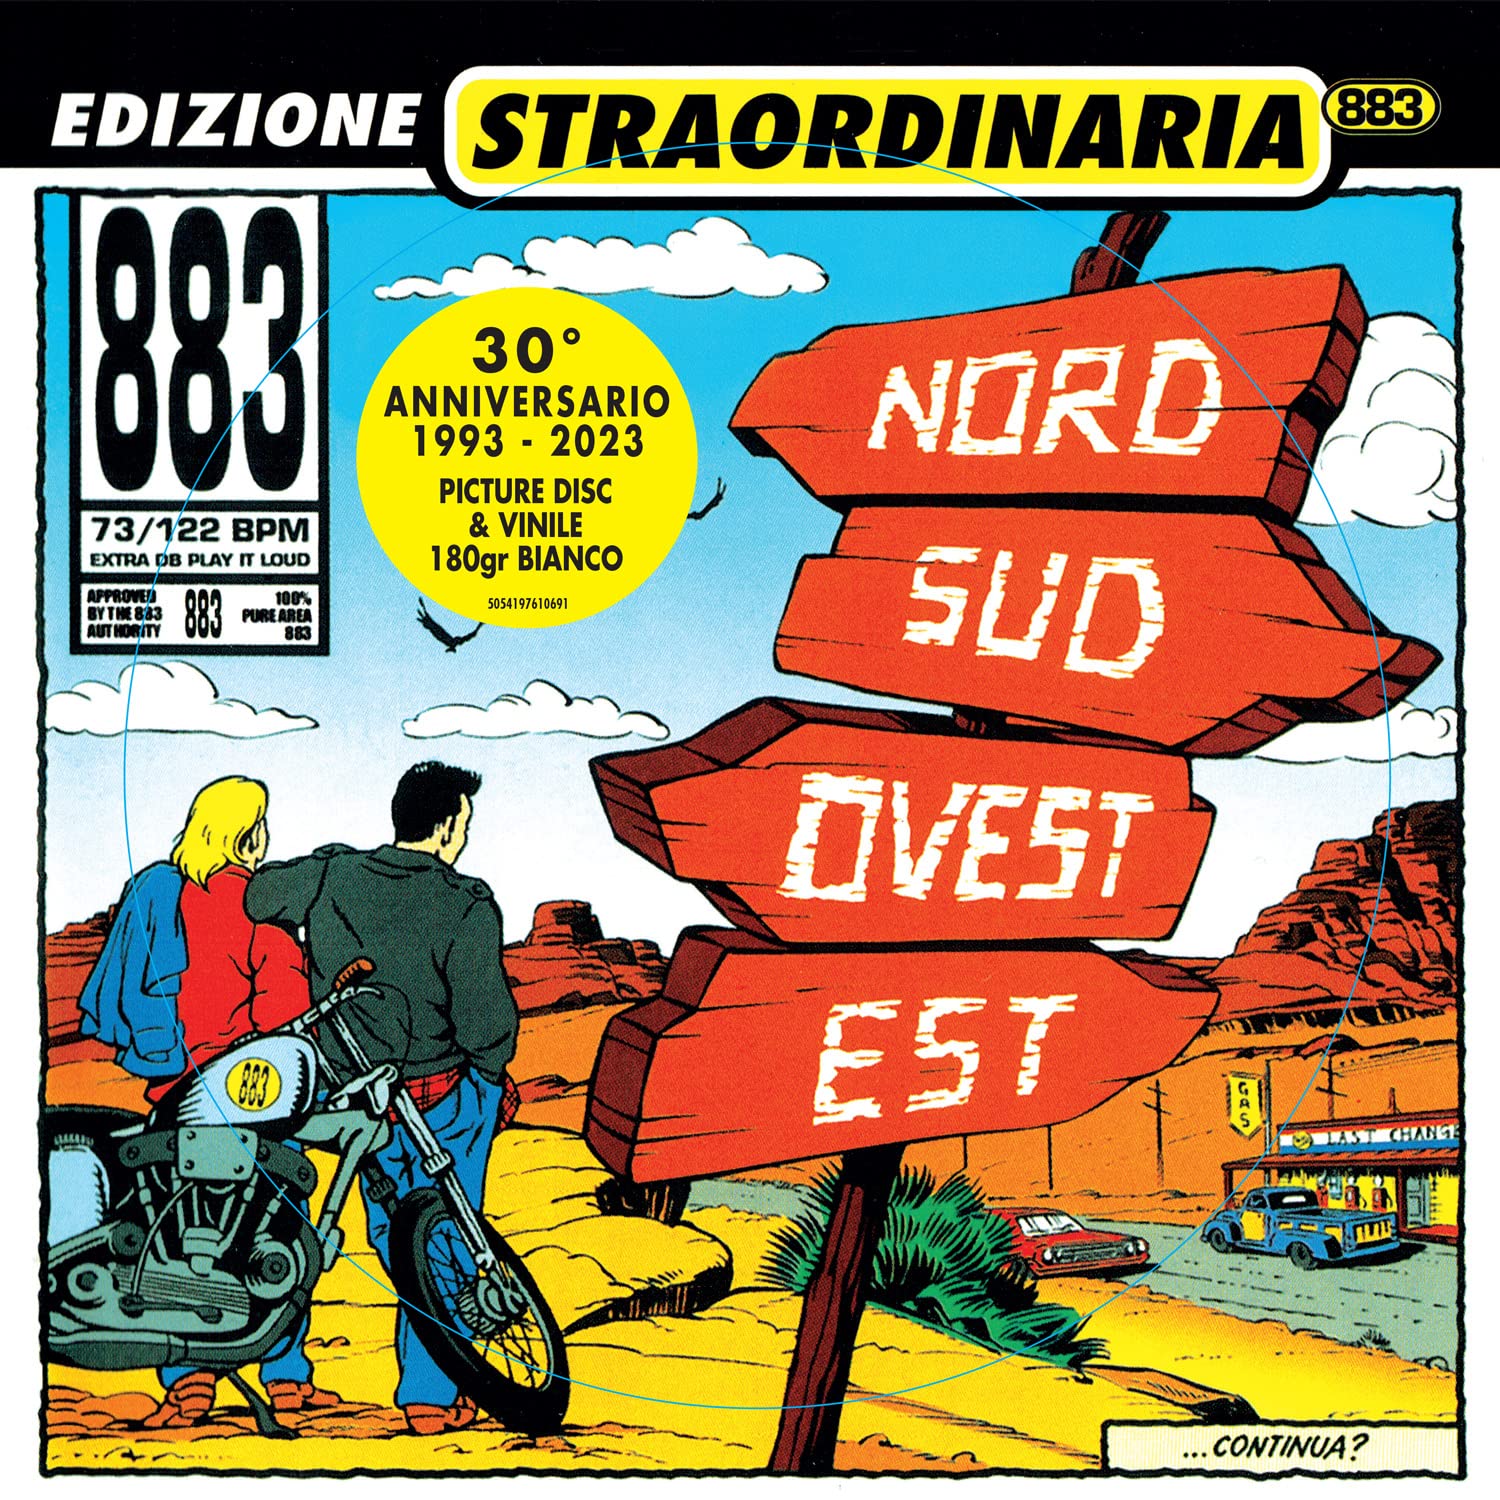 883 - NORD SUD OVEST EST - LP - MADE IN ITALY